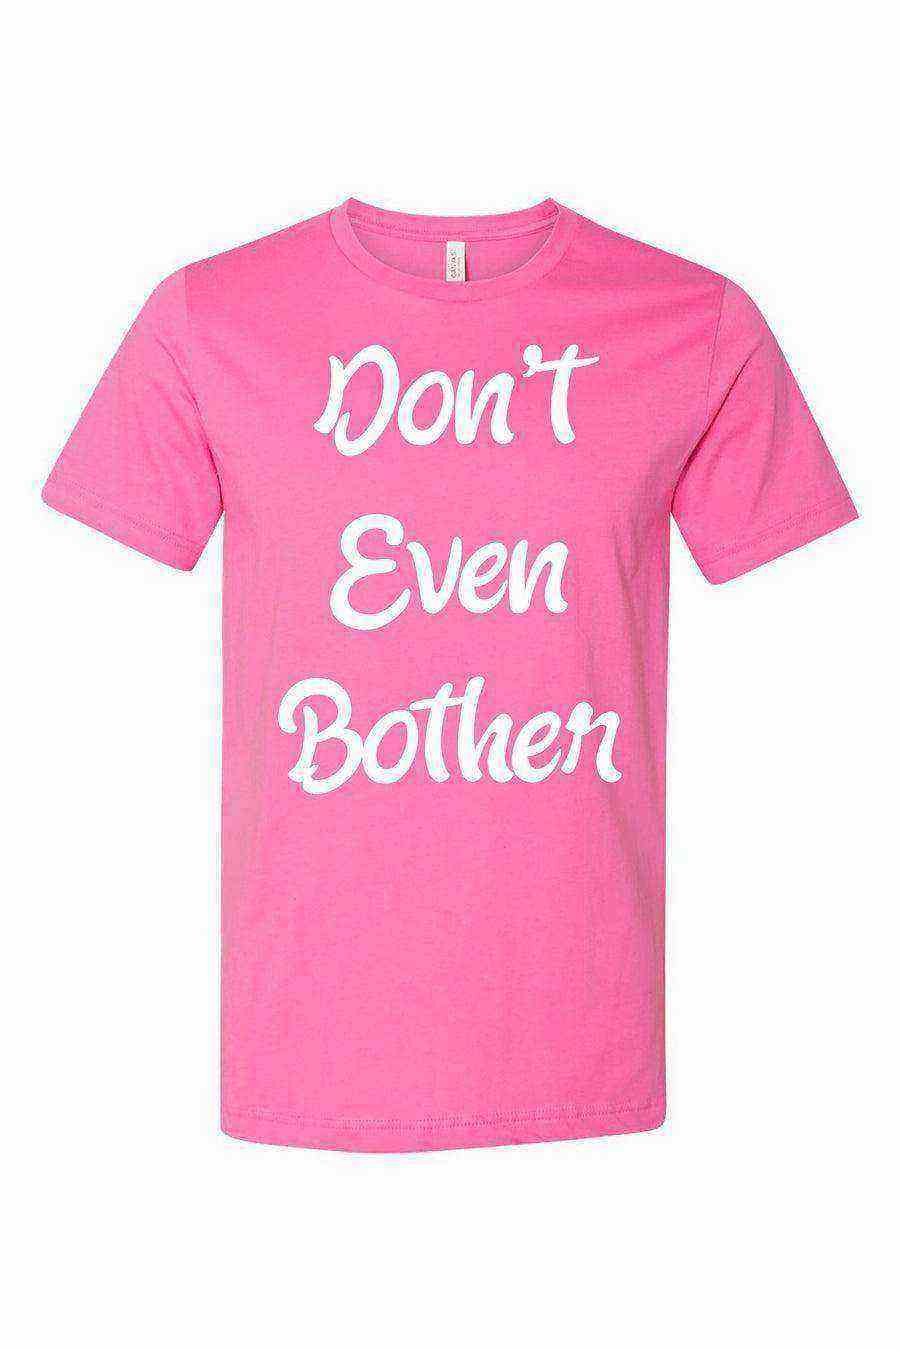 Dont Even Bother Shirt - Dylan's Tees